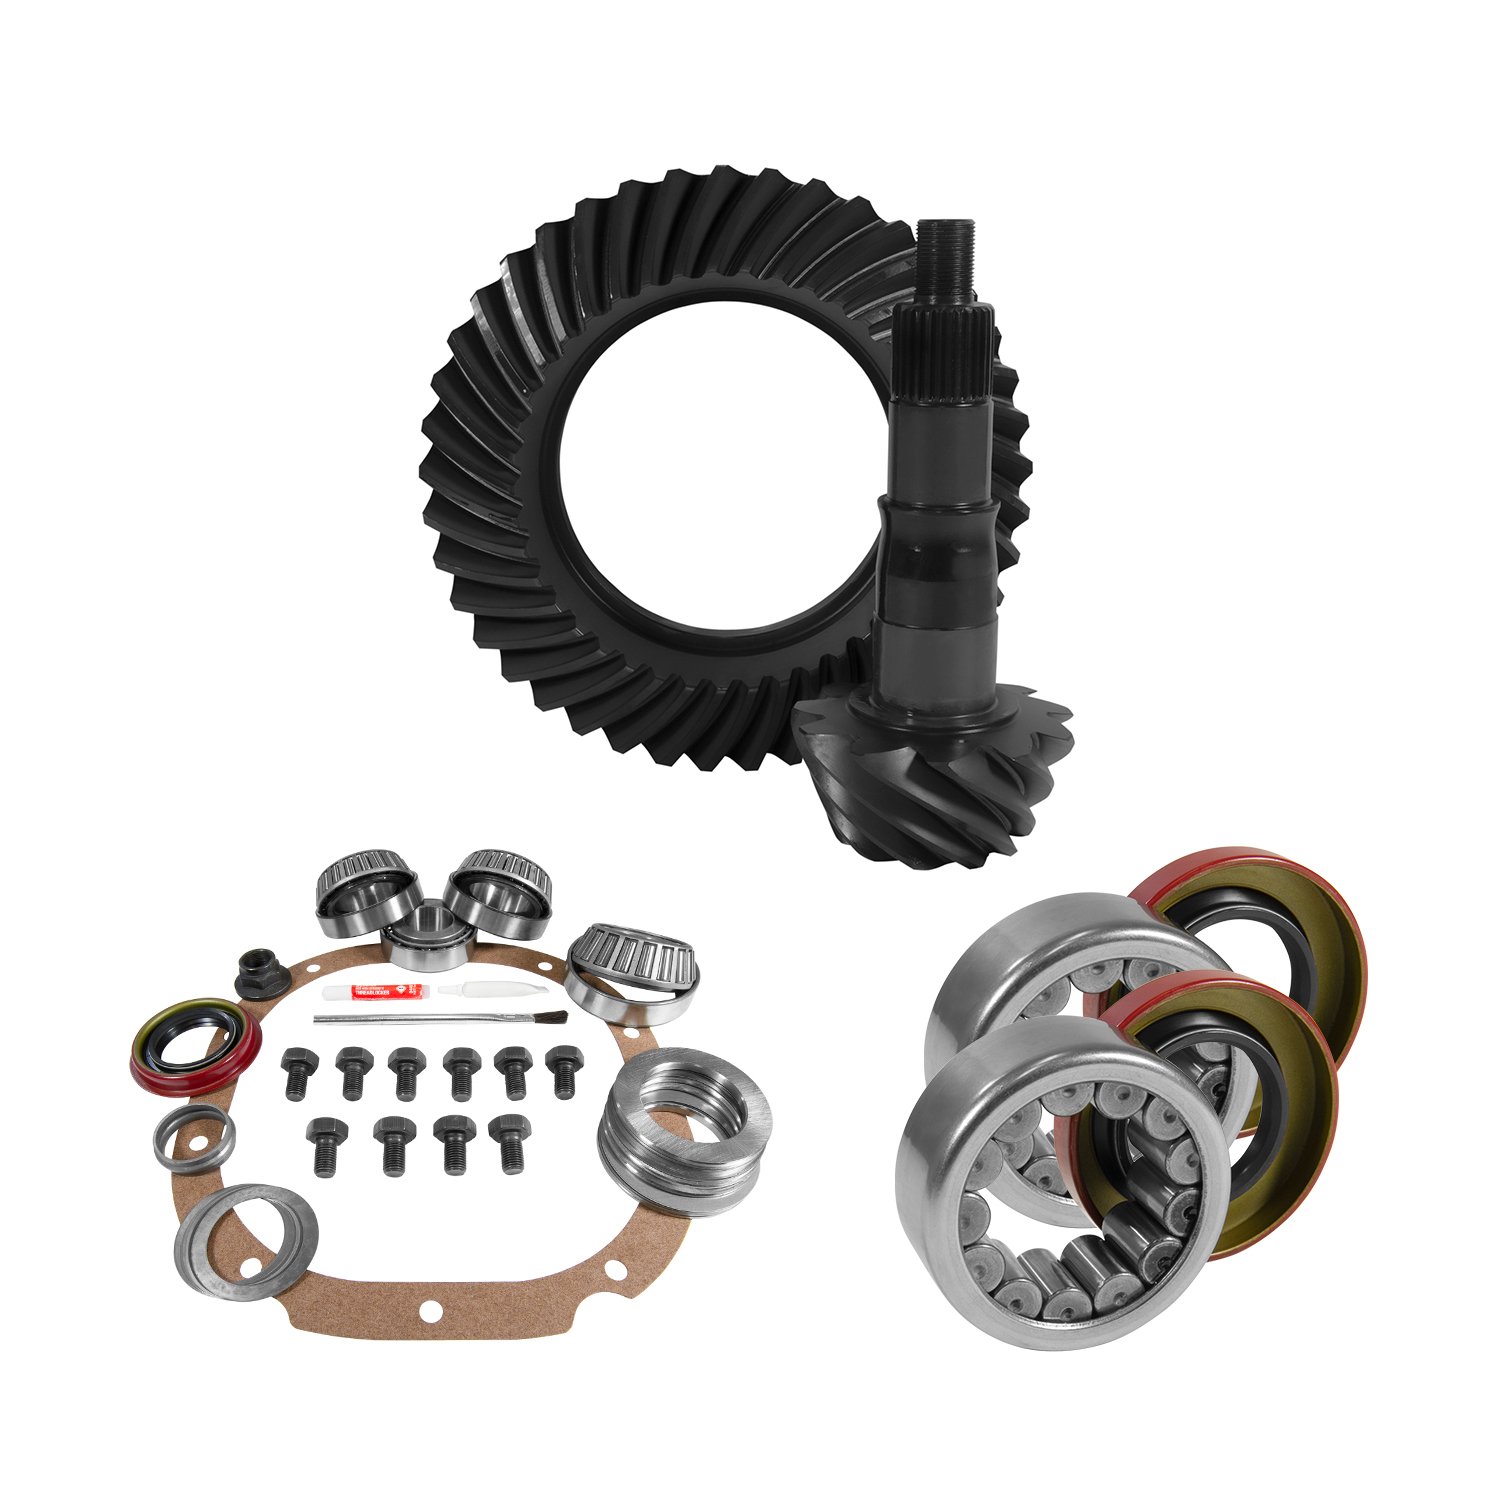 USA Standard 10777 8.8 in. Ford 3.73 Rear Ring & Pinion Install Kit, 2.99 in. Od Axle Bearings & Seals